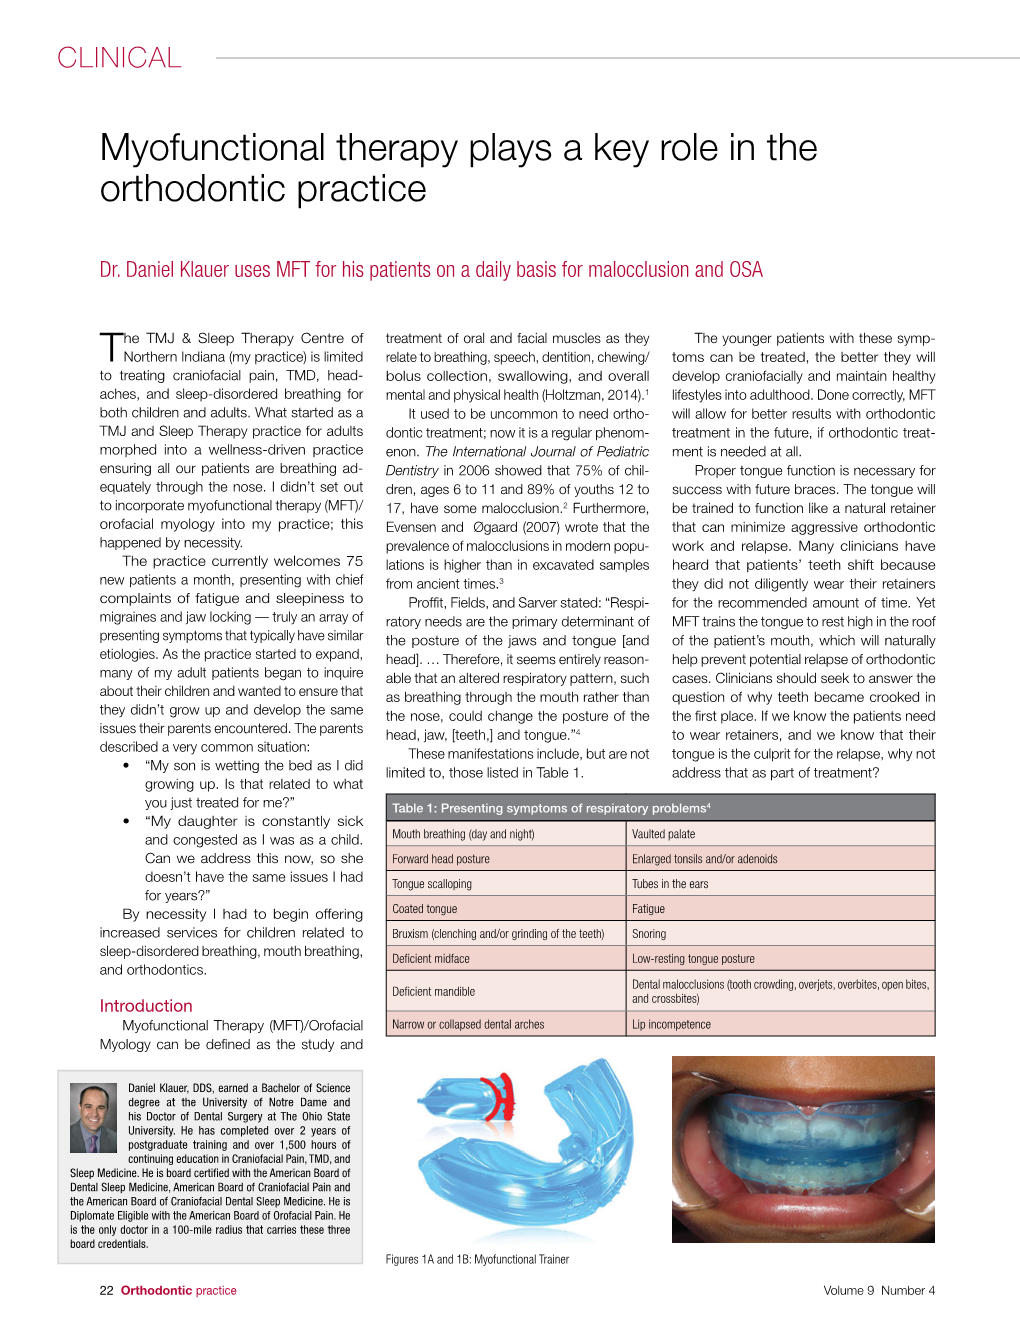 Myofunctional Therapy Plays a Key Role in the Orthodontic Practice